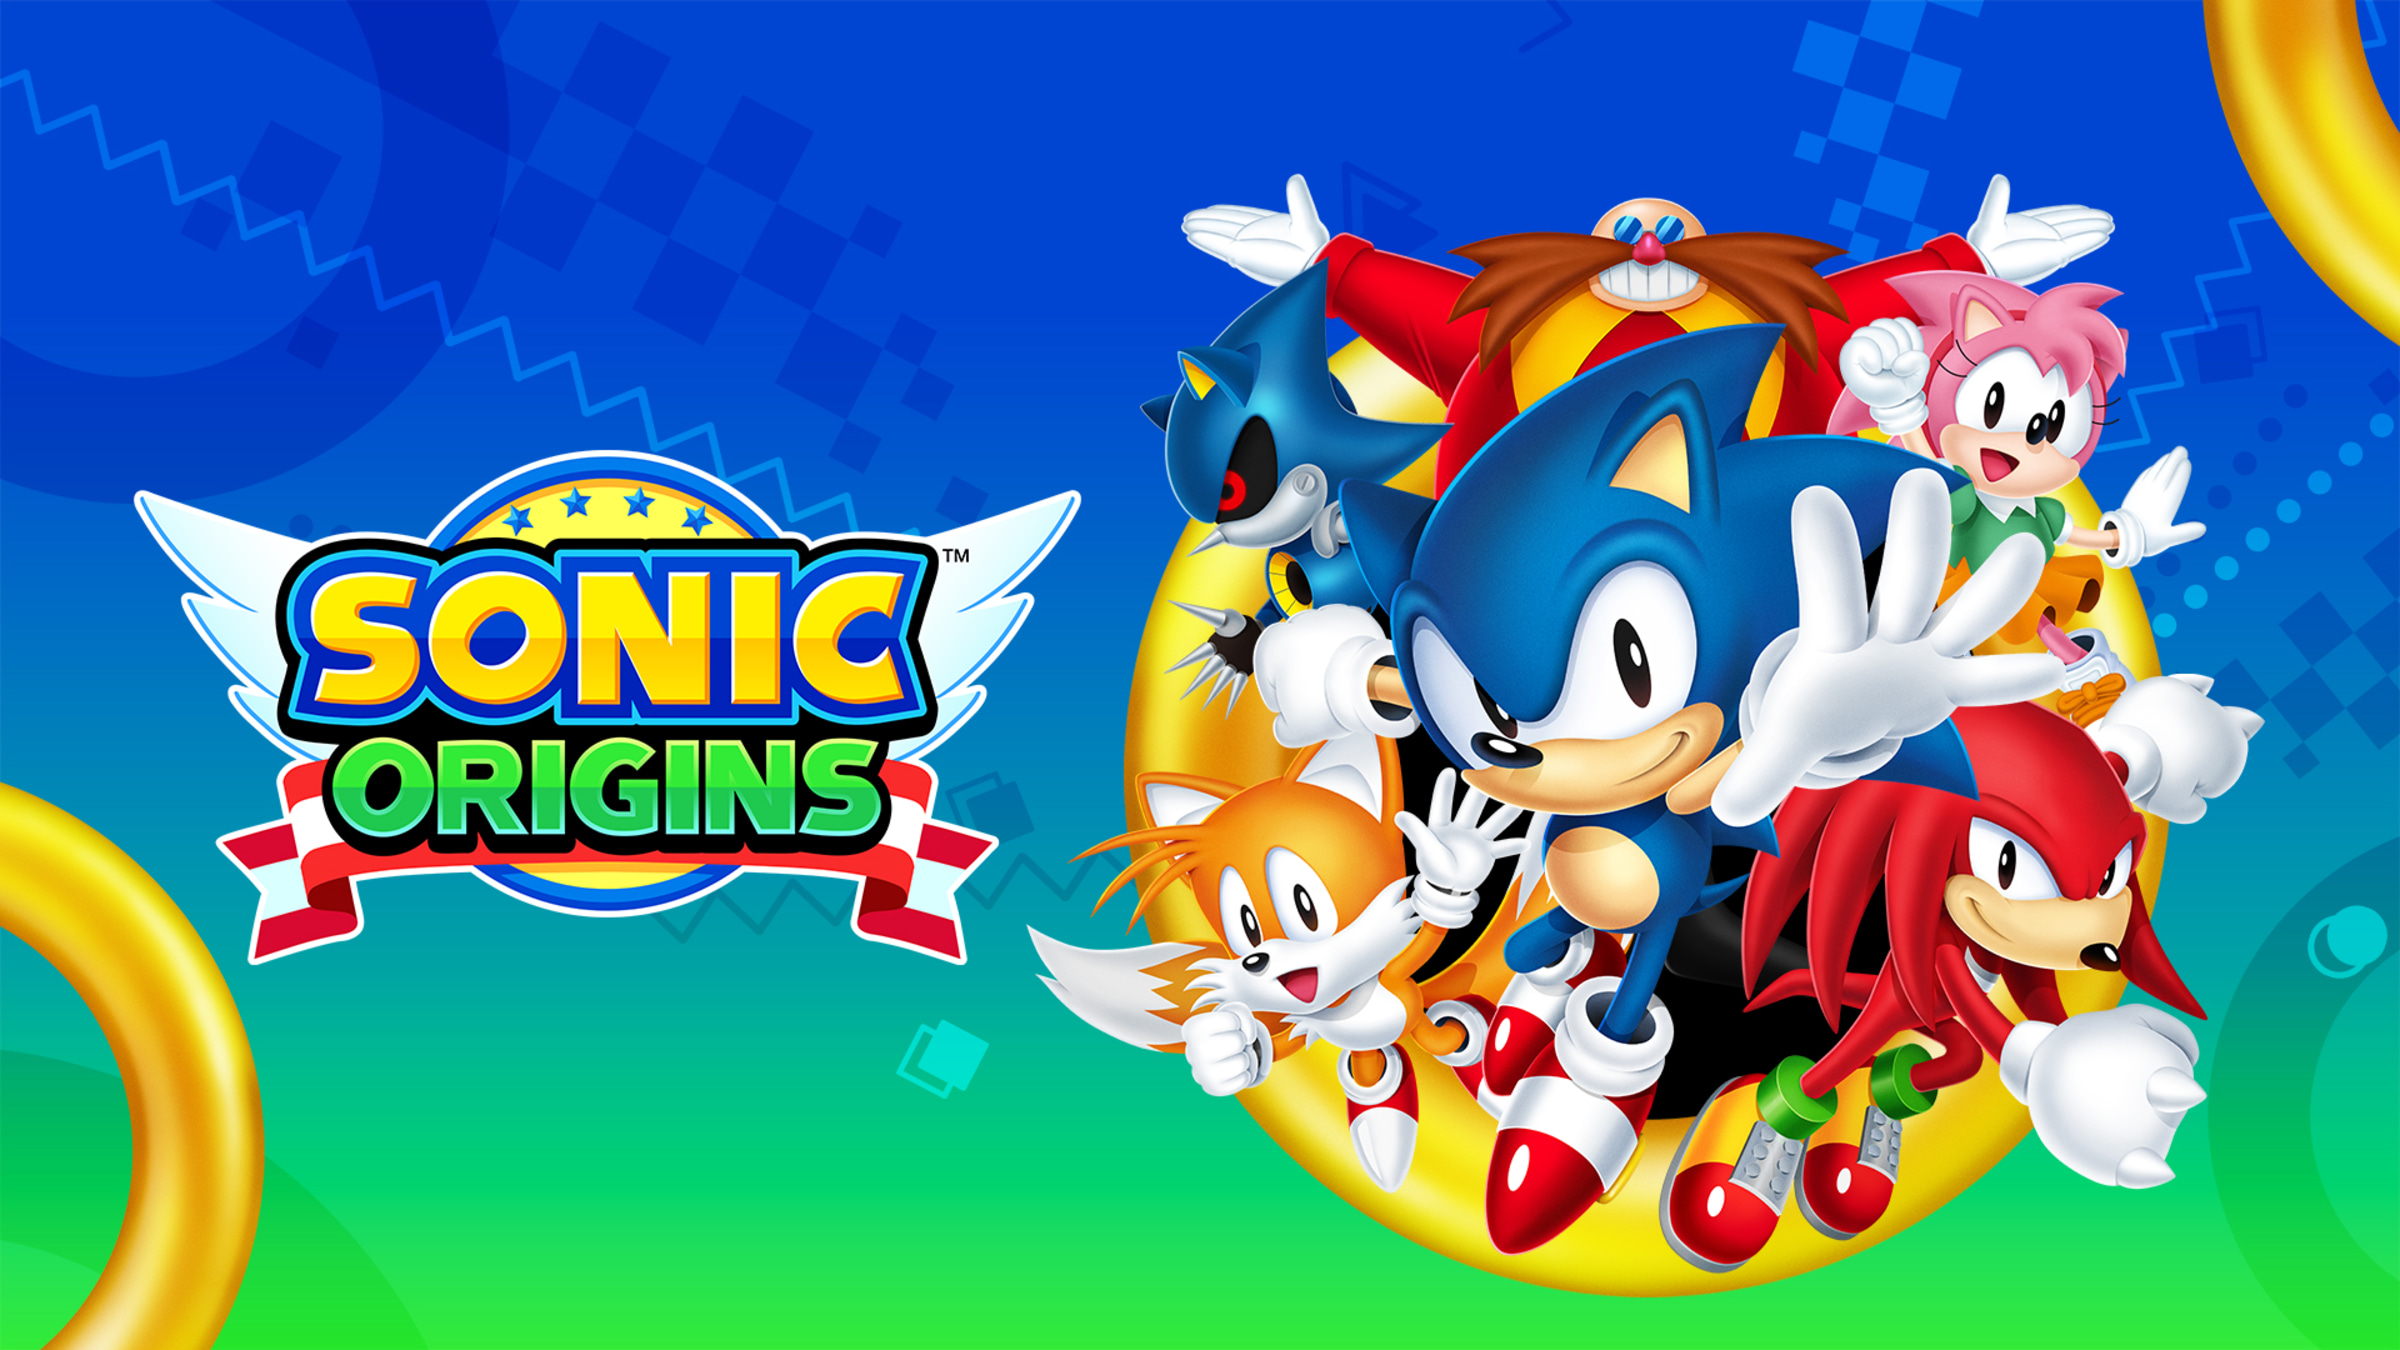 Sonic Colors Video Games for sale